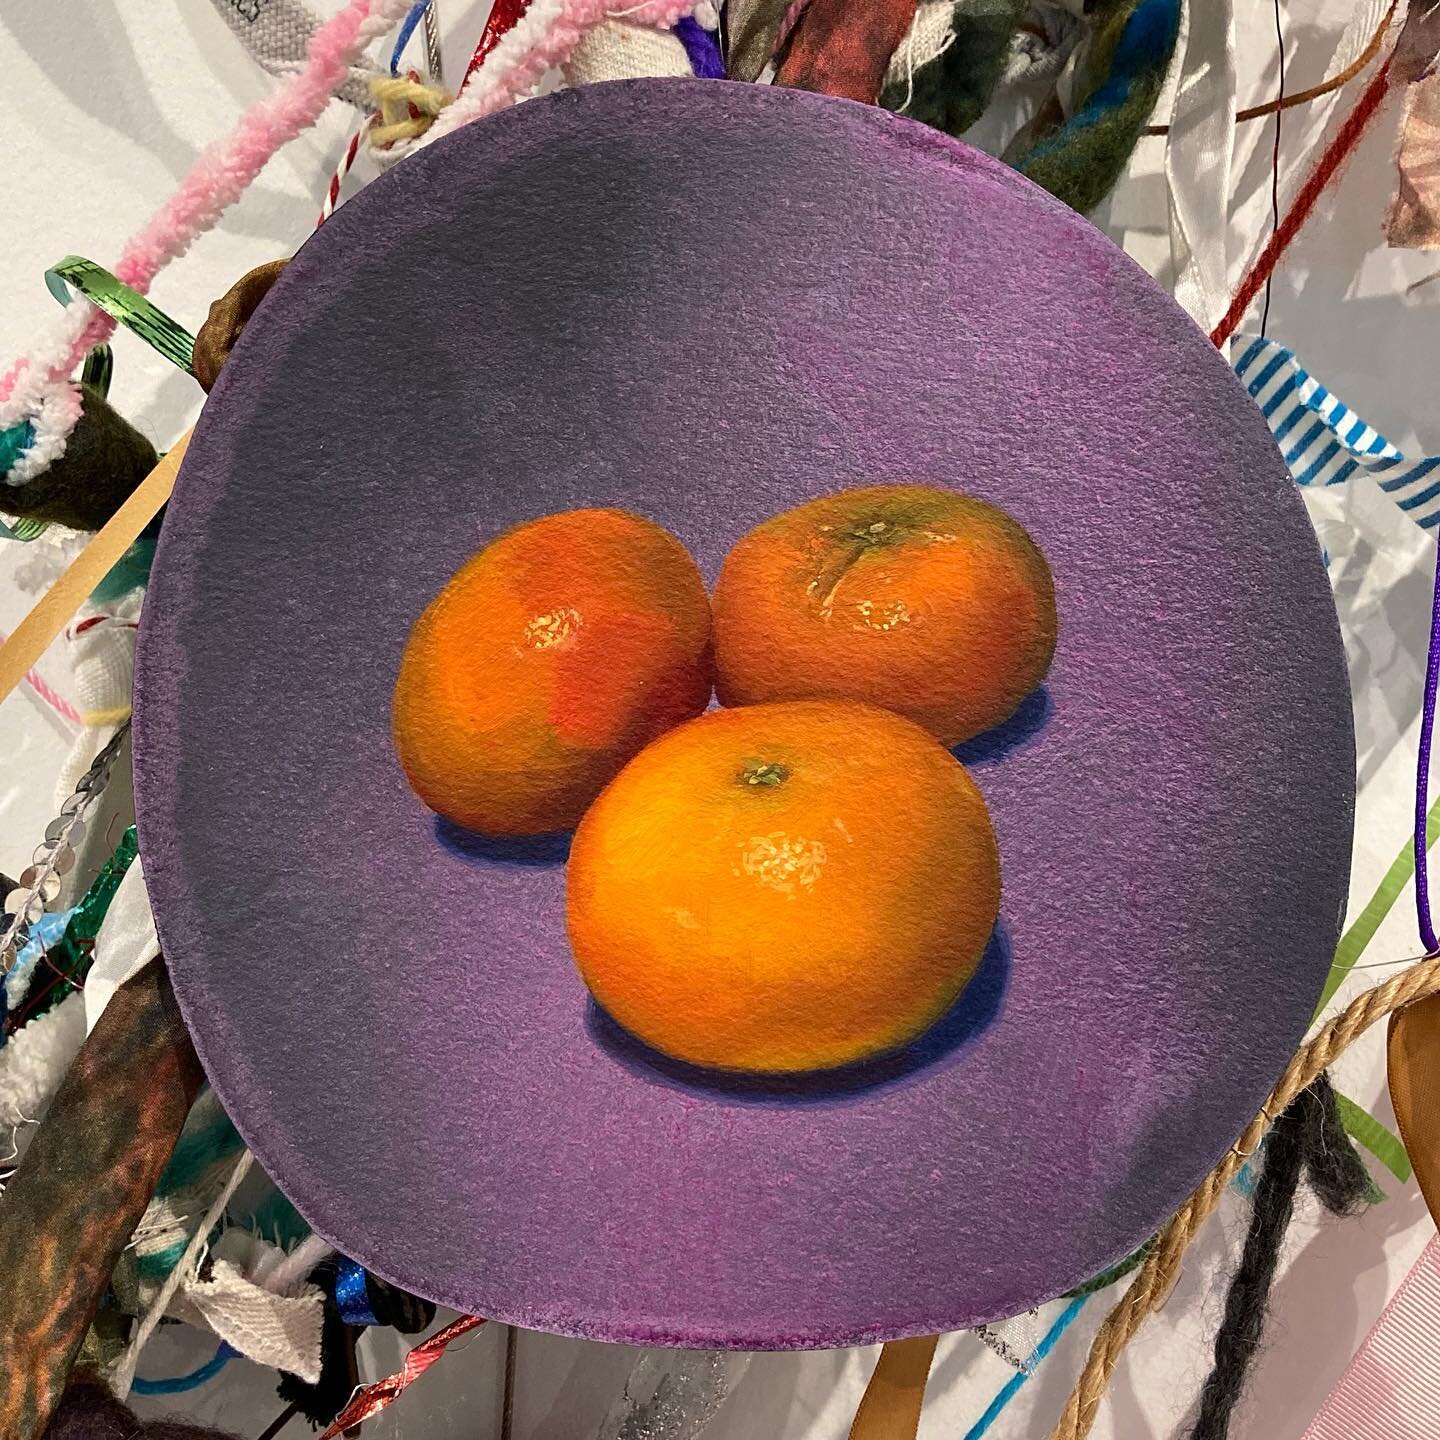 Come by the gallery today for some clementines! 🧡💜

&lsquo;Spellbound&rsquo; opening reception 2 - 5 pm
@lesliegrovegallery 
Saturday September 24

#orange #openings #torontoartopening #torontotoday #torontoartscene #artgallery #torontoartgallery #